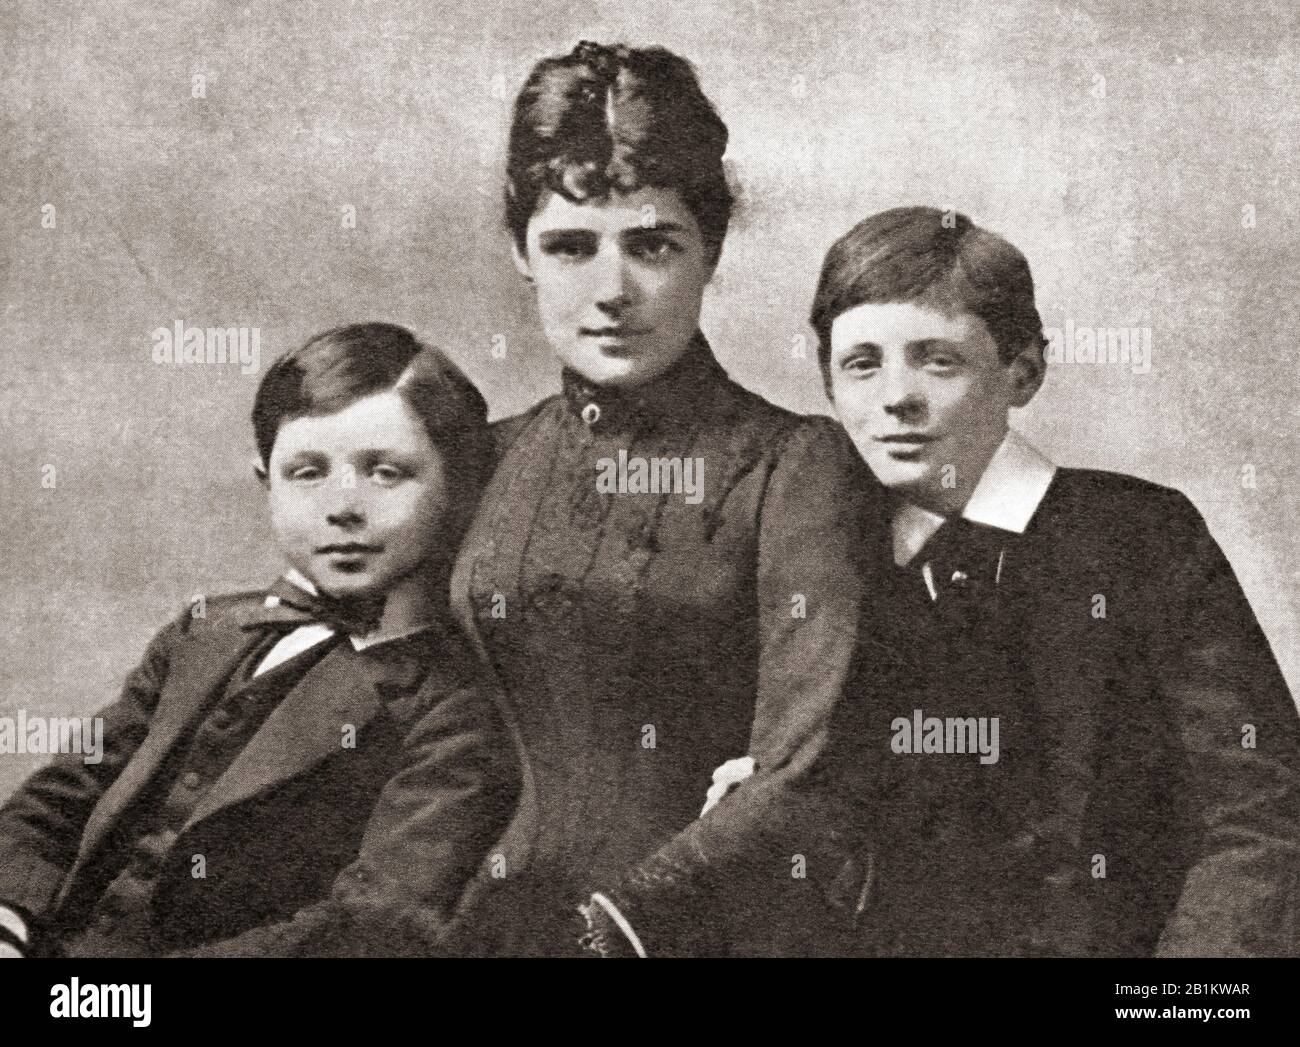 Winston Chuchil, right, with his mother Jennie Spencer-Churchill and his brother, John Strange Spencer-Churchill, 1889. Jennie Spencer-Churchill, née Jerome, 1854 – 1921, aka Lady Randolph Churchill.  American-born British socialite.  Sir Winston Leonard Spencer-Churchill, 1874 – 1965. British politician, army officer, writer and twice Prime Minister of the United Kingdom. Major John Strange Spencer-Churchill, 1880 –1947, aka Jack Churchill. Stock Photo